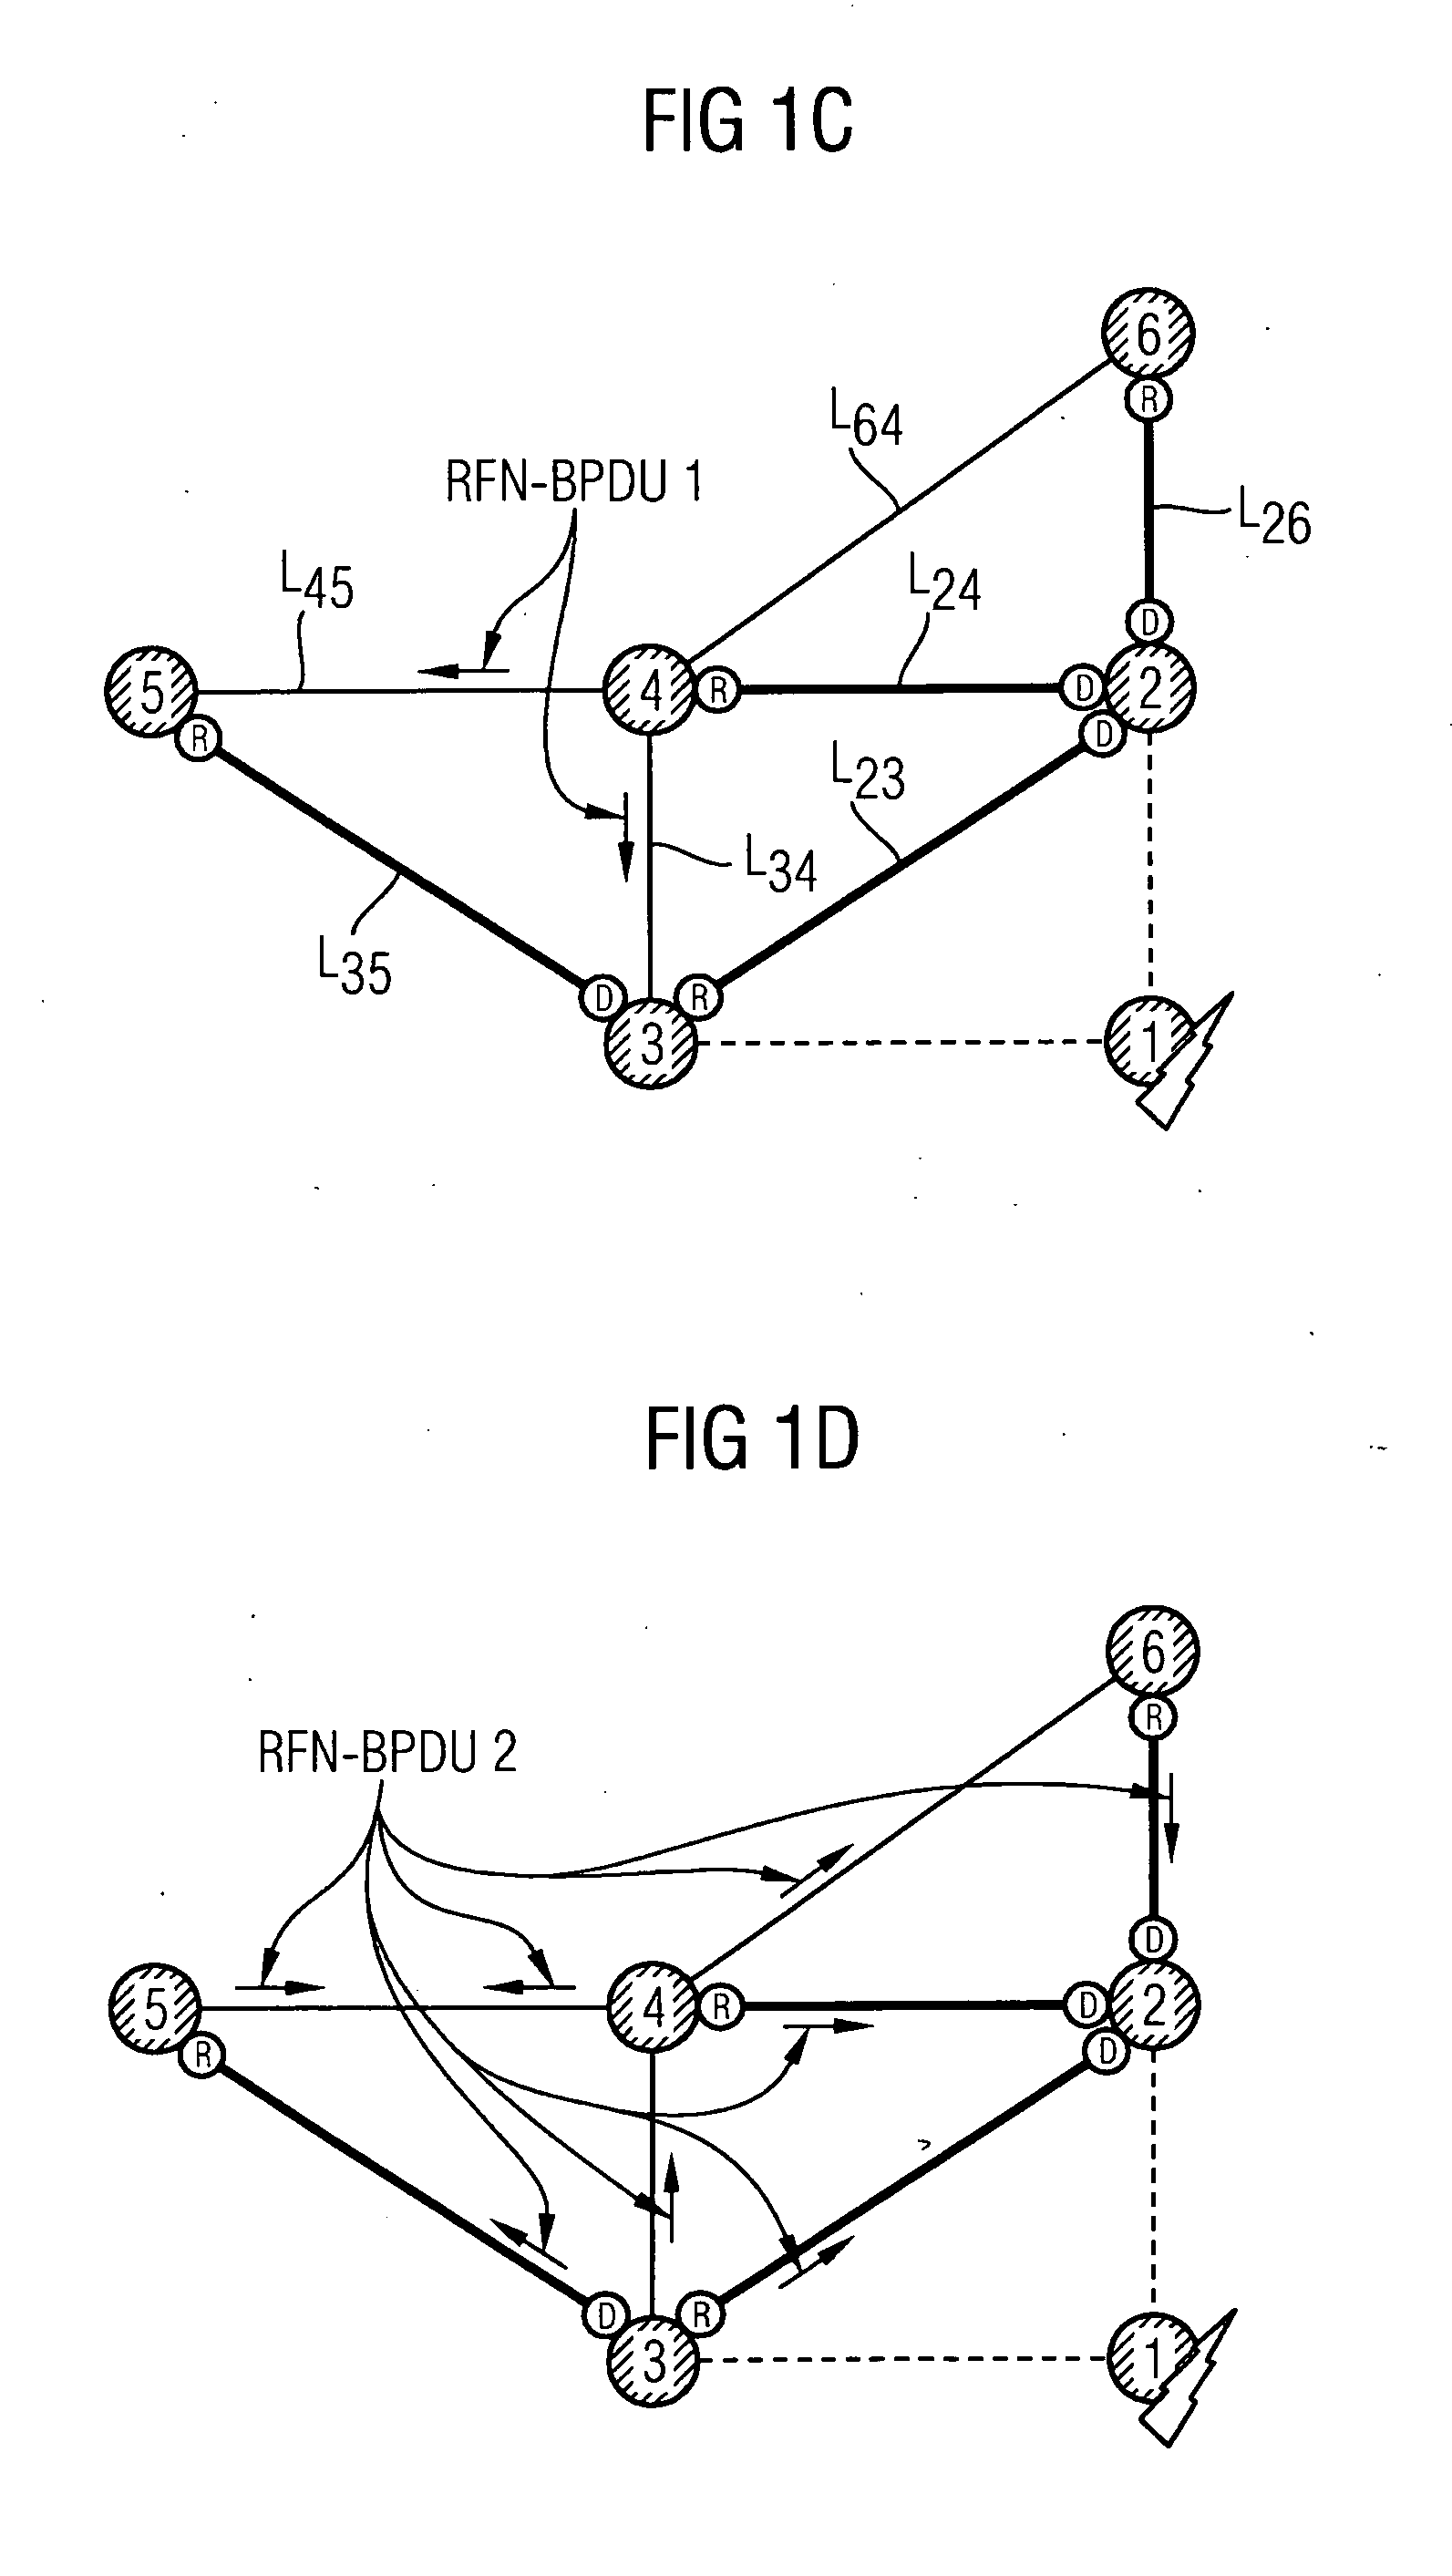 Method for reconfiguring a communication network